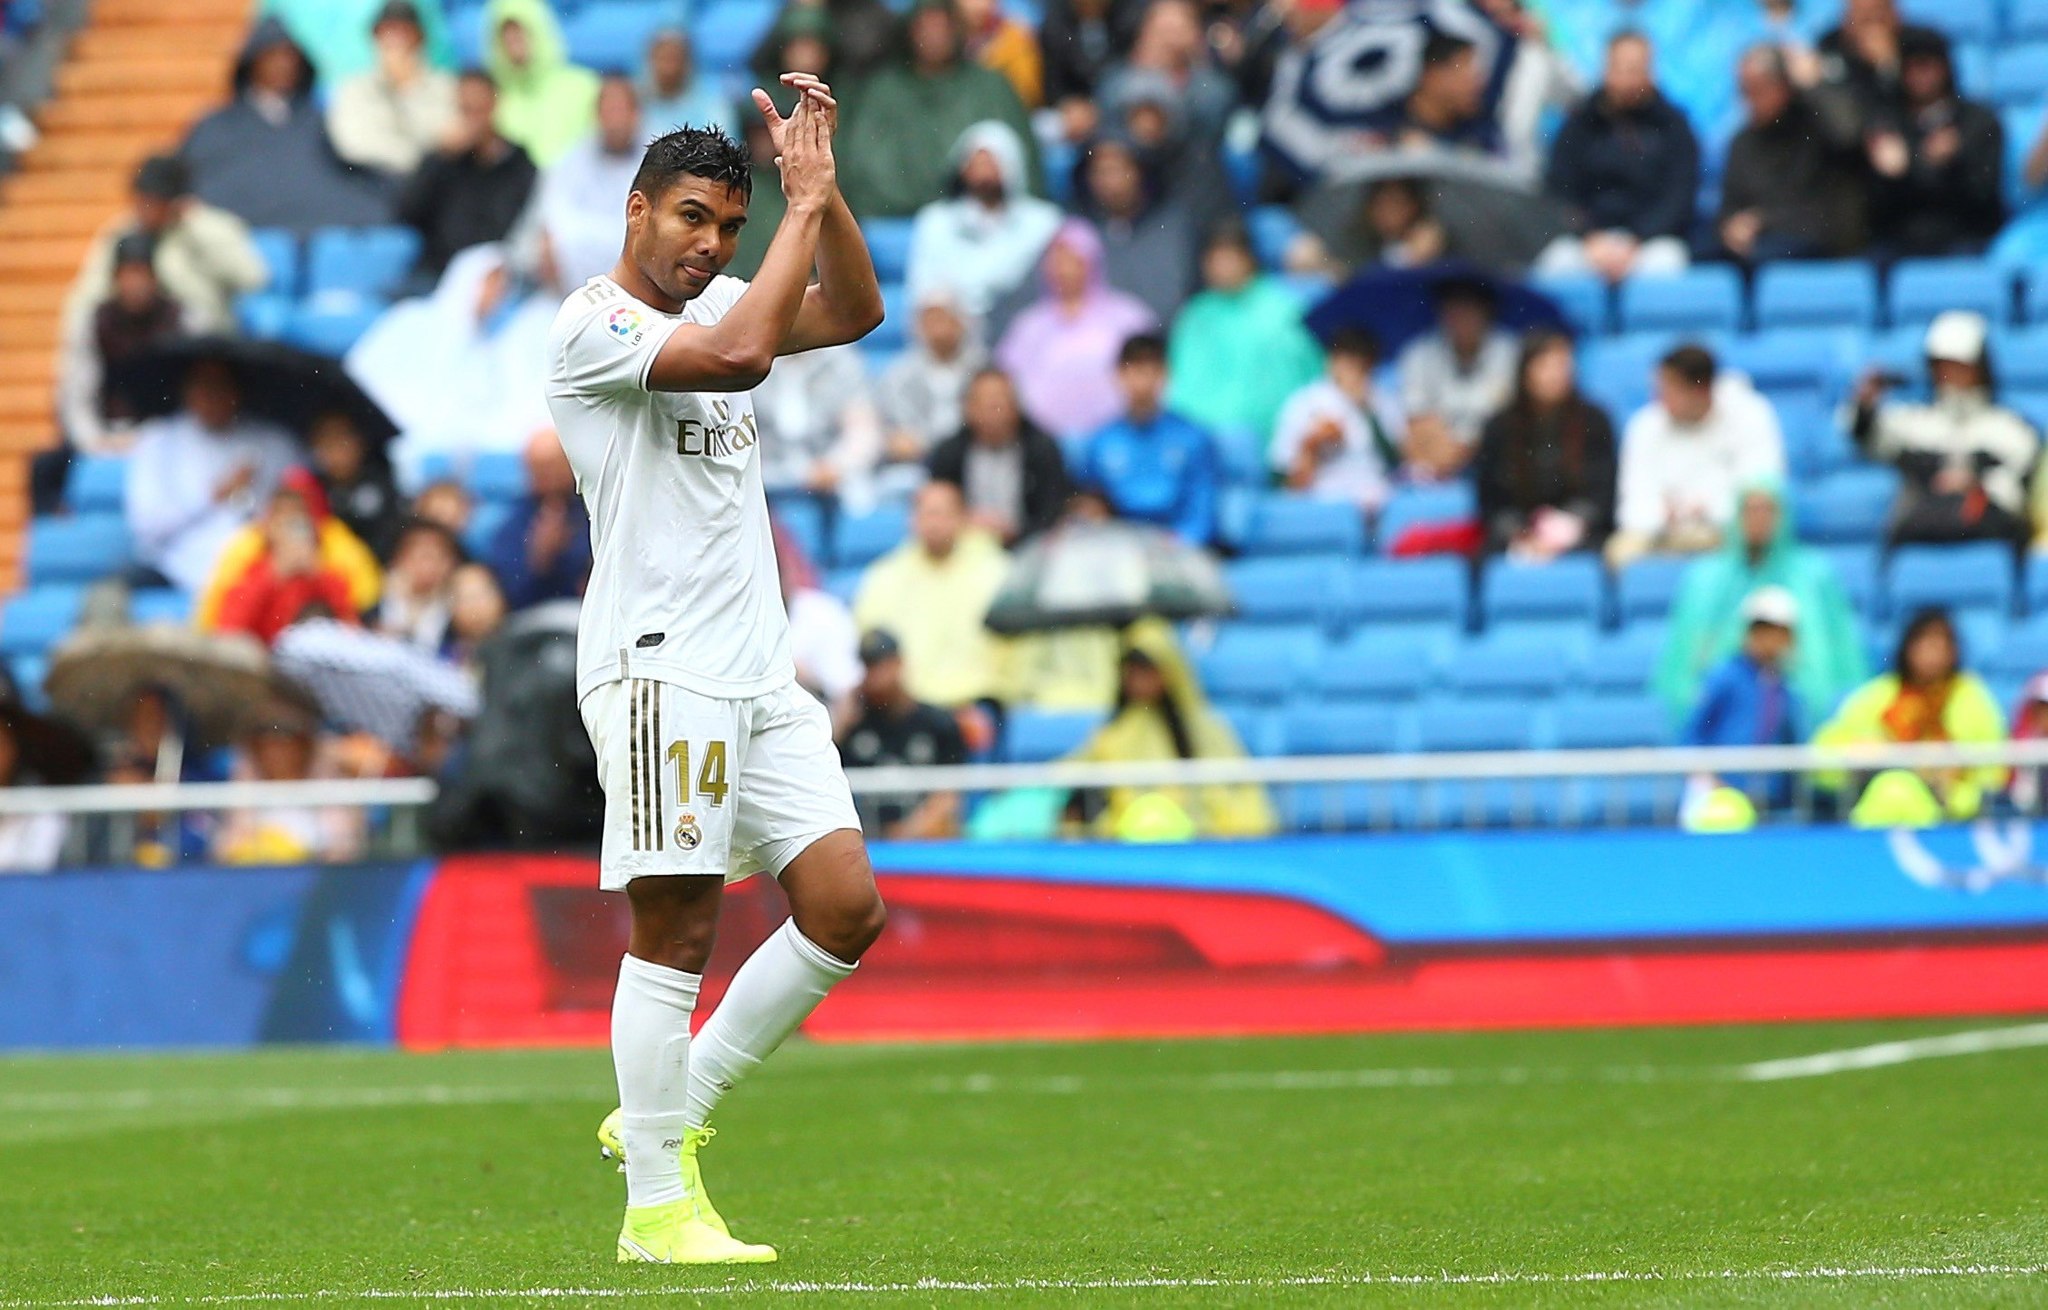 Casemiro after being substituted against Levante.